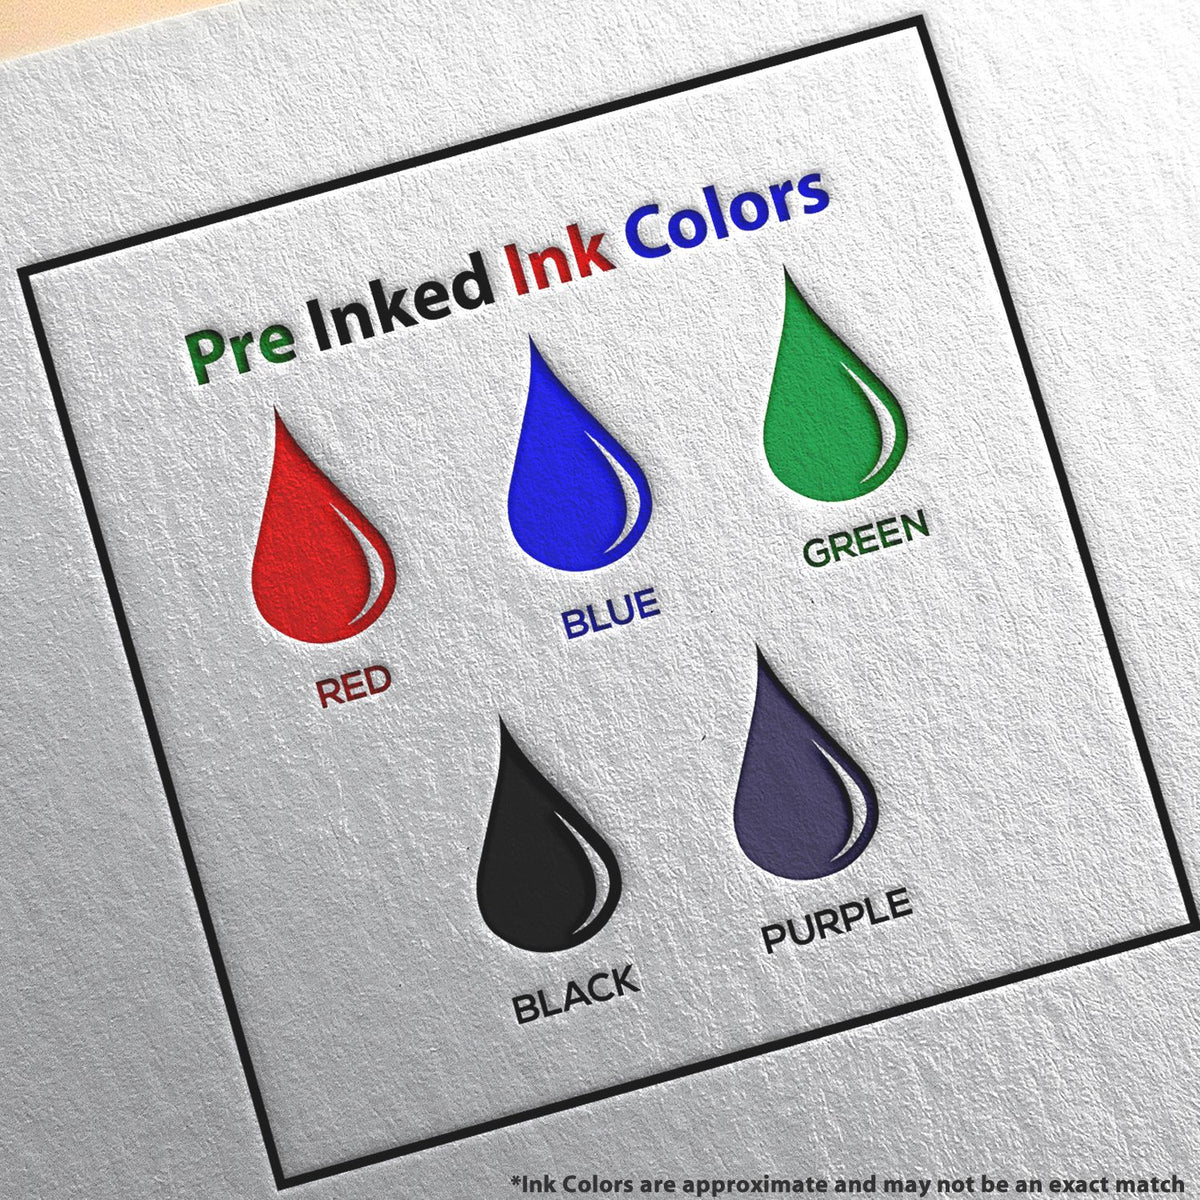 A picture showing the different ink colors or hues available for the Premium MaxLight Pre-Inked Maine Landscape Architectural Stamp product.